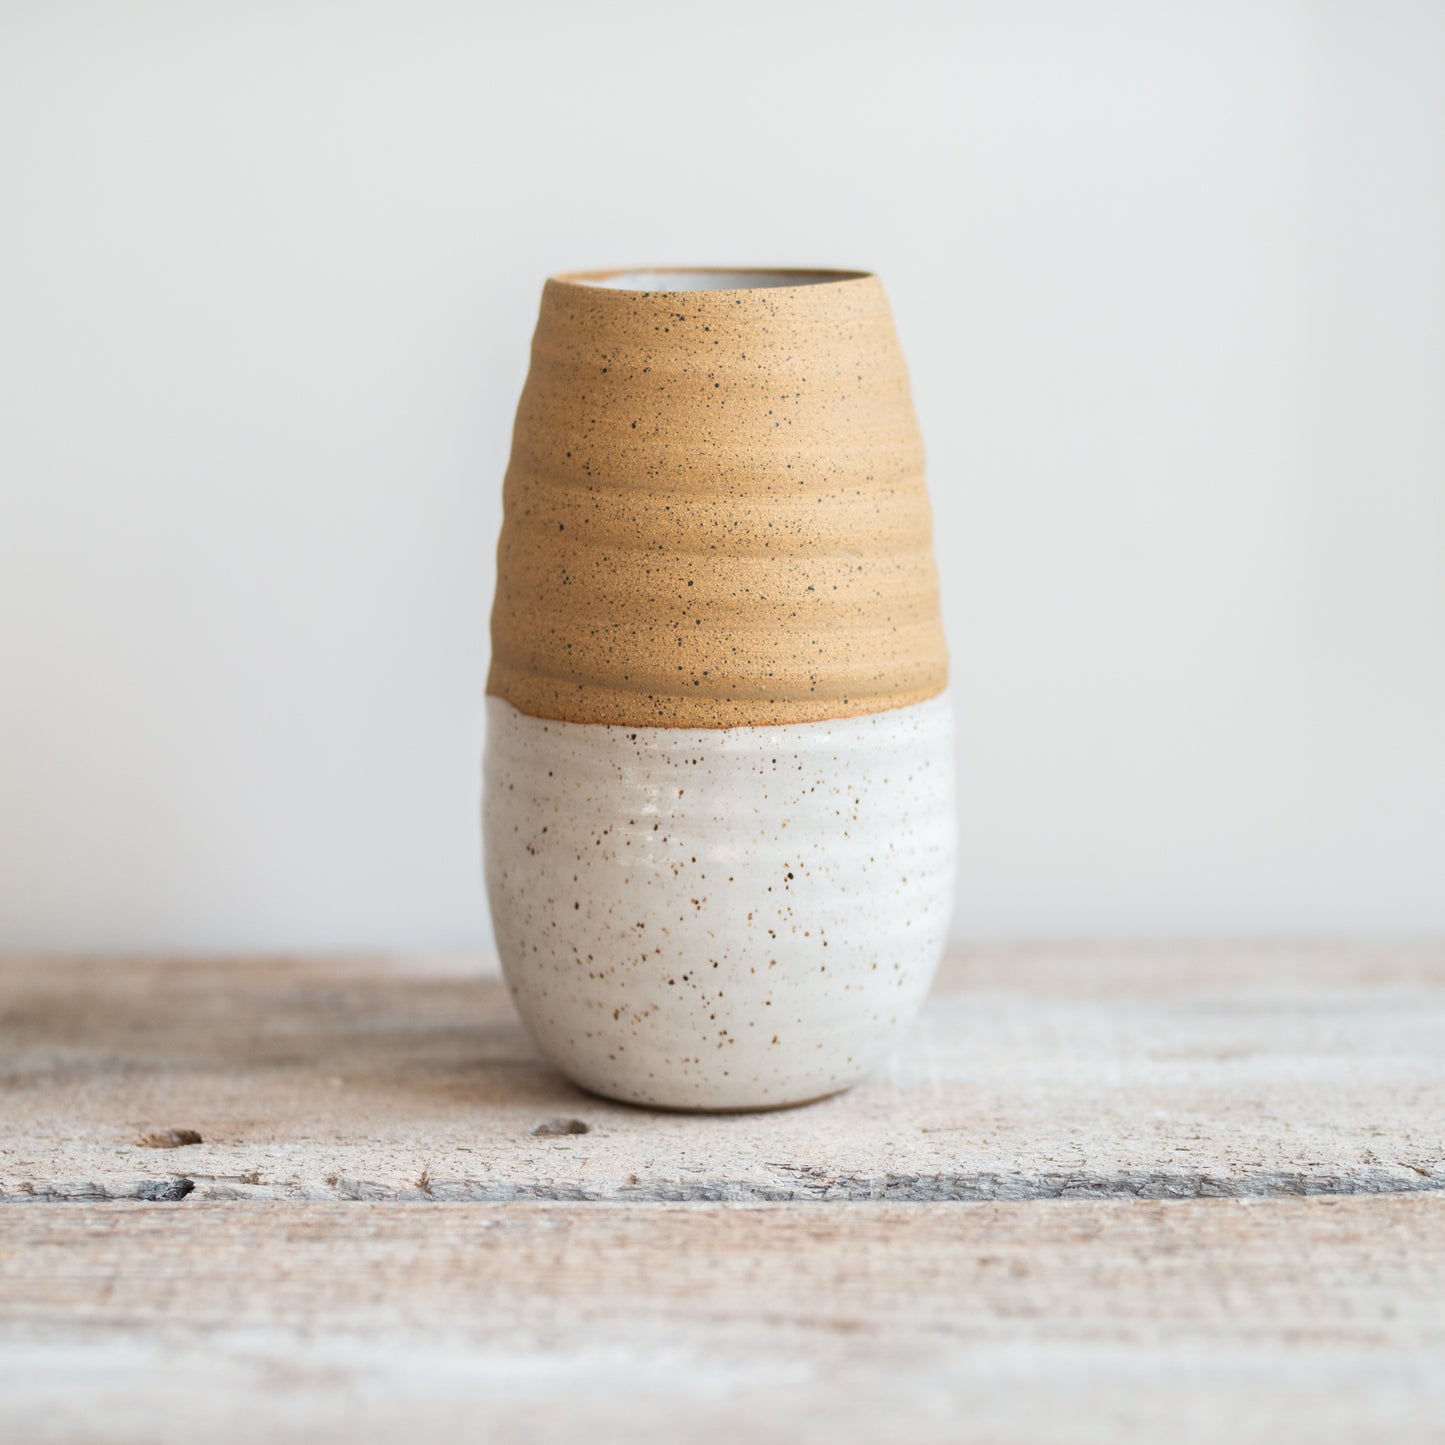 The Ye11ow Studio Tall Vase 9" With Raw Clay Top